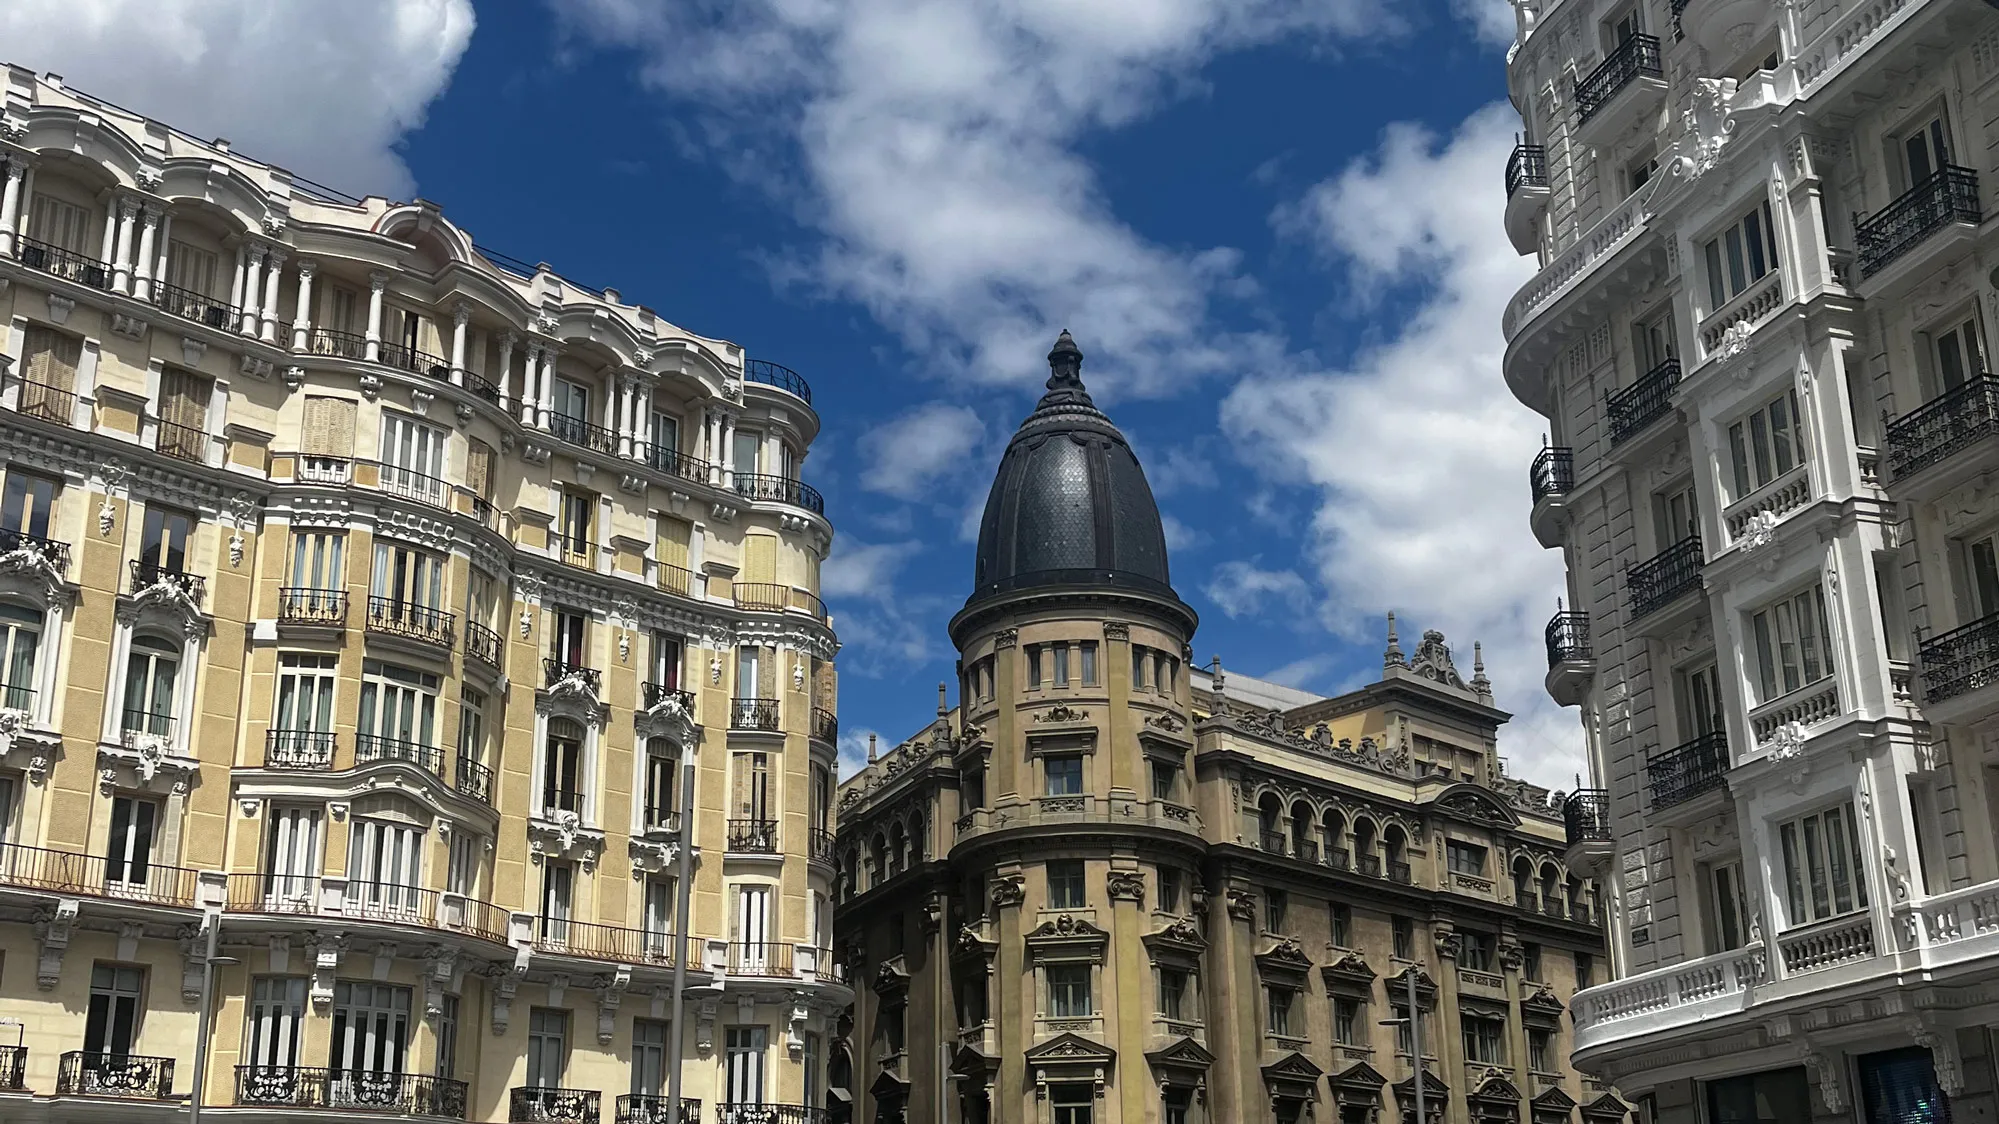 In downtown Madrid, where the streets Gran Via and Calle de Alcala cross, the tall, ornate buildings sport detailed window decor, railings and roof lines. They give off a uniquely European feel.